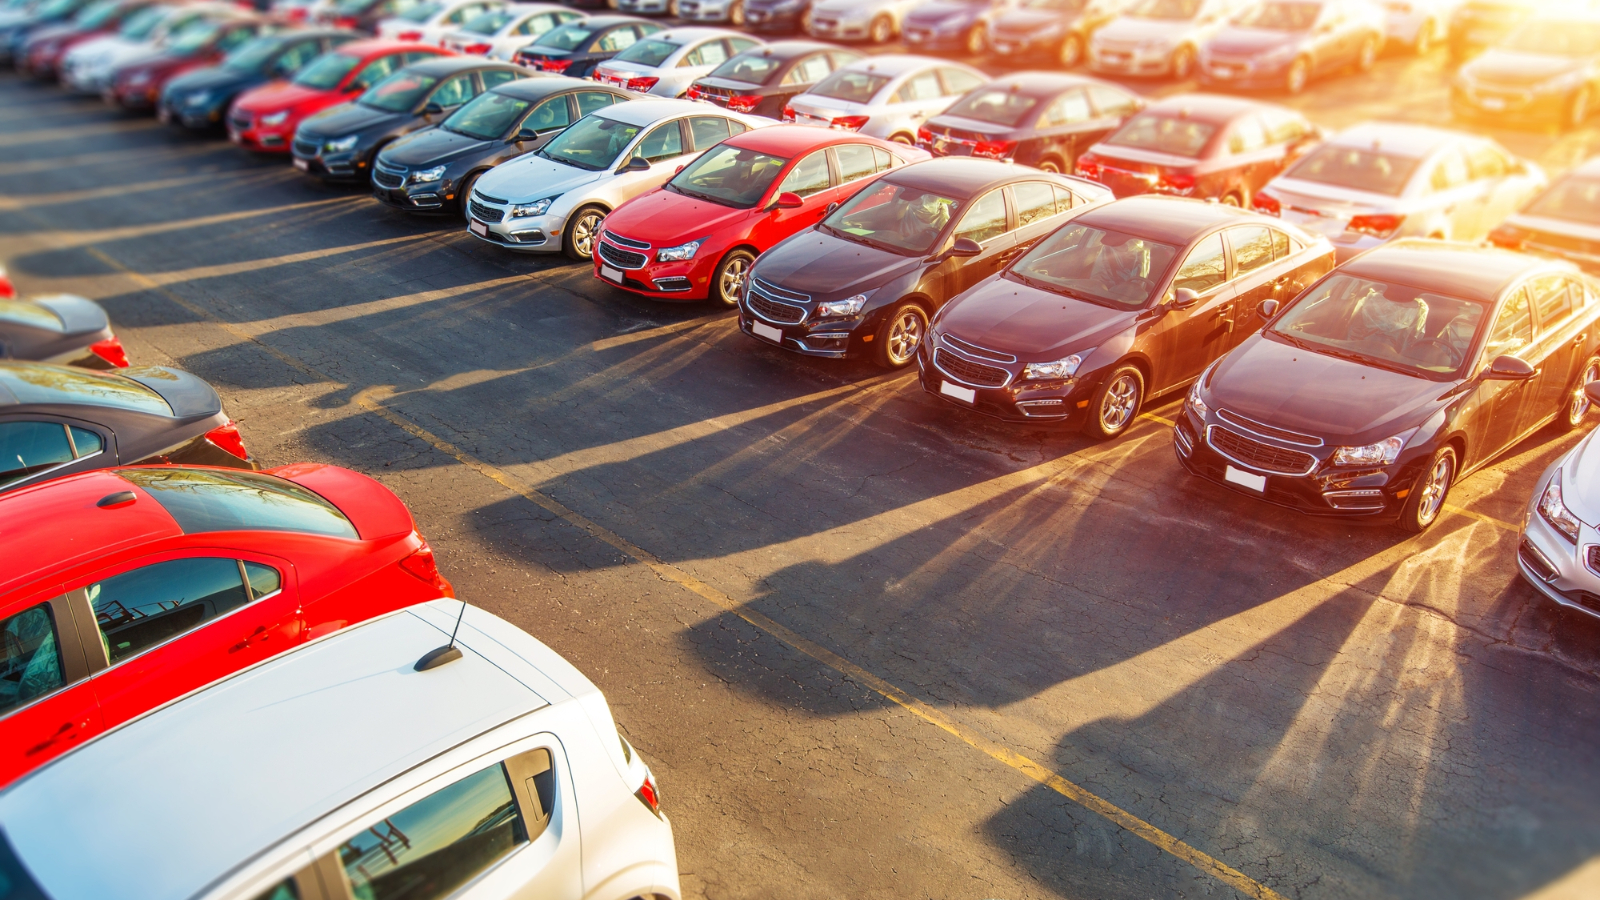 10 Common Mistakes to Avoid When Getting an Auto Loan - Car Talk